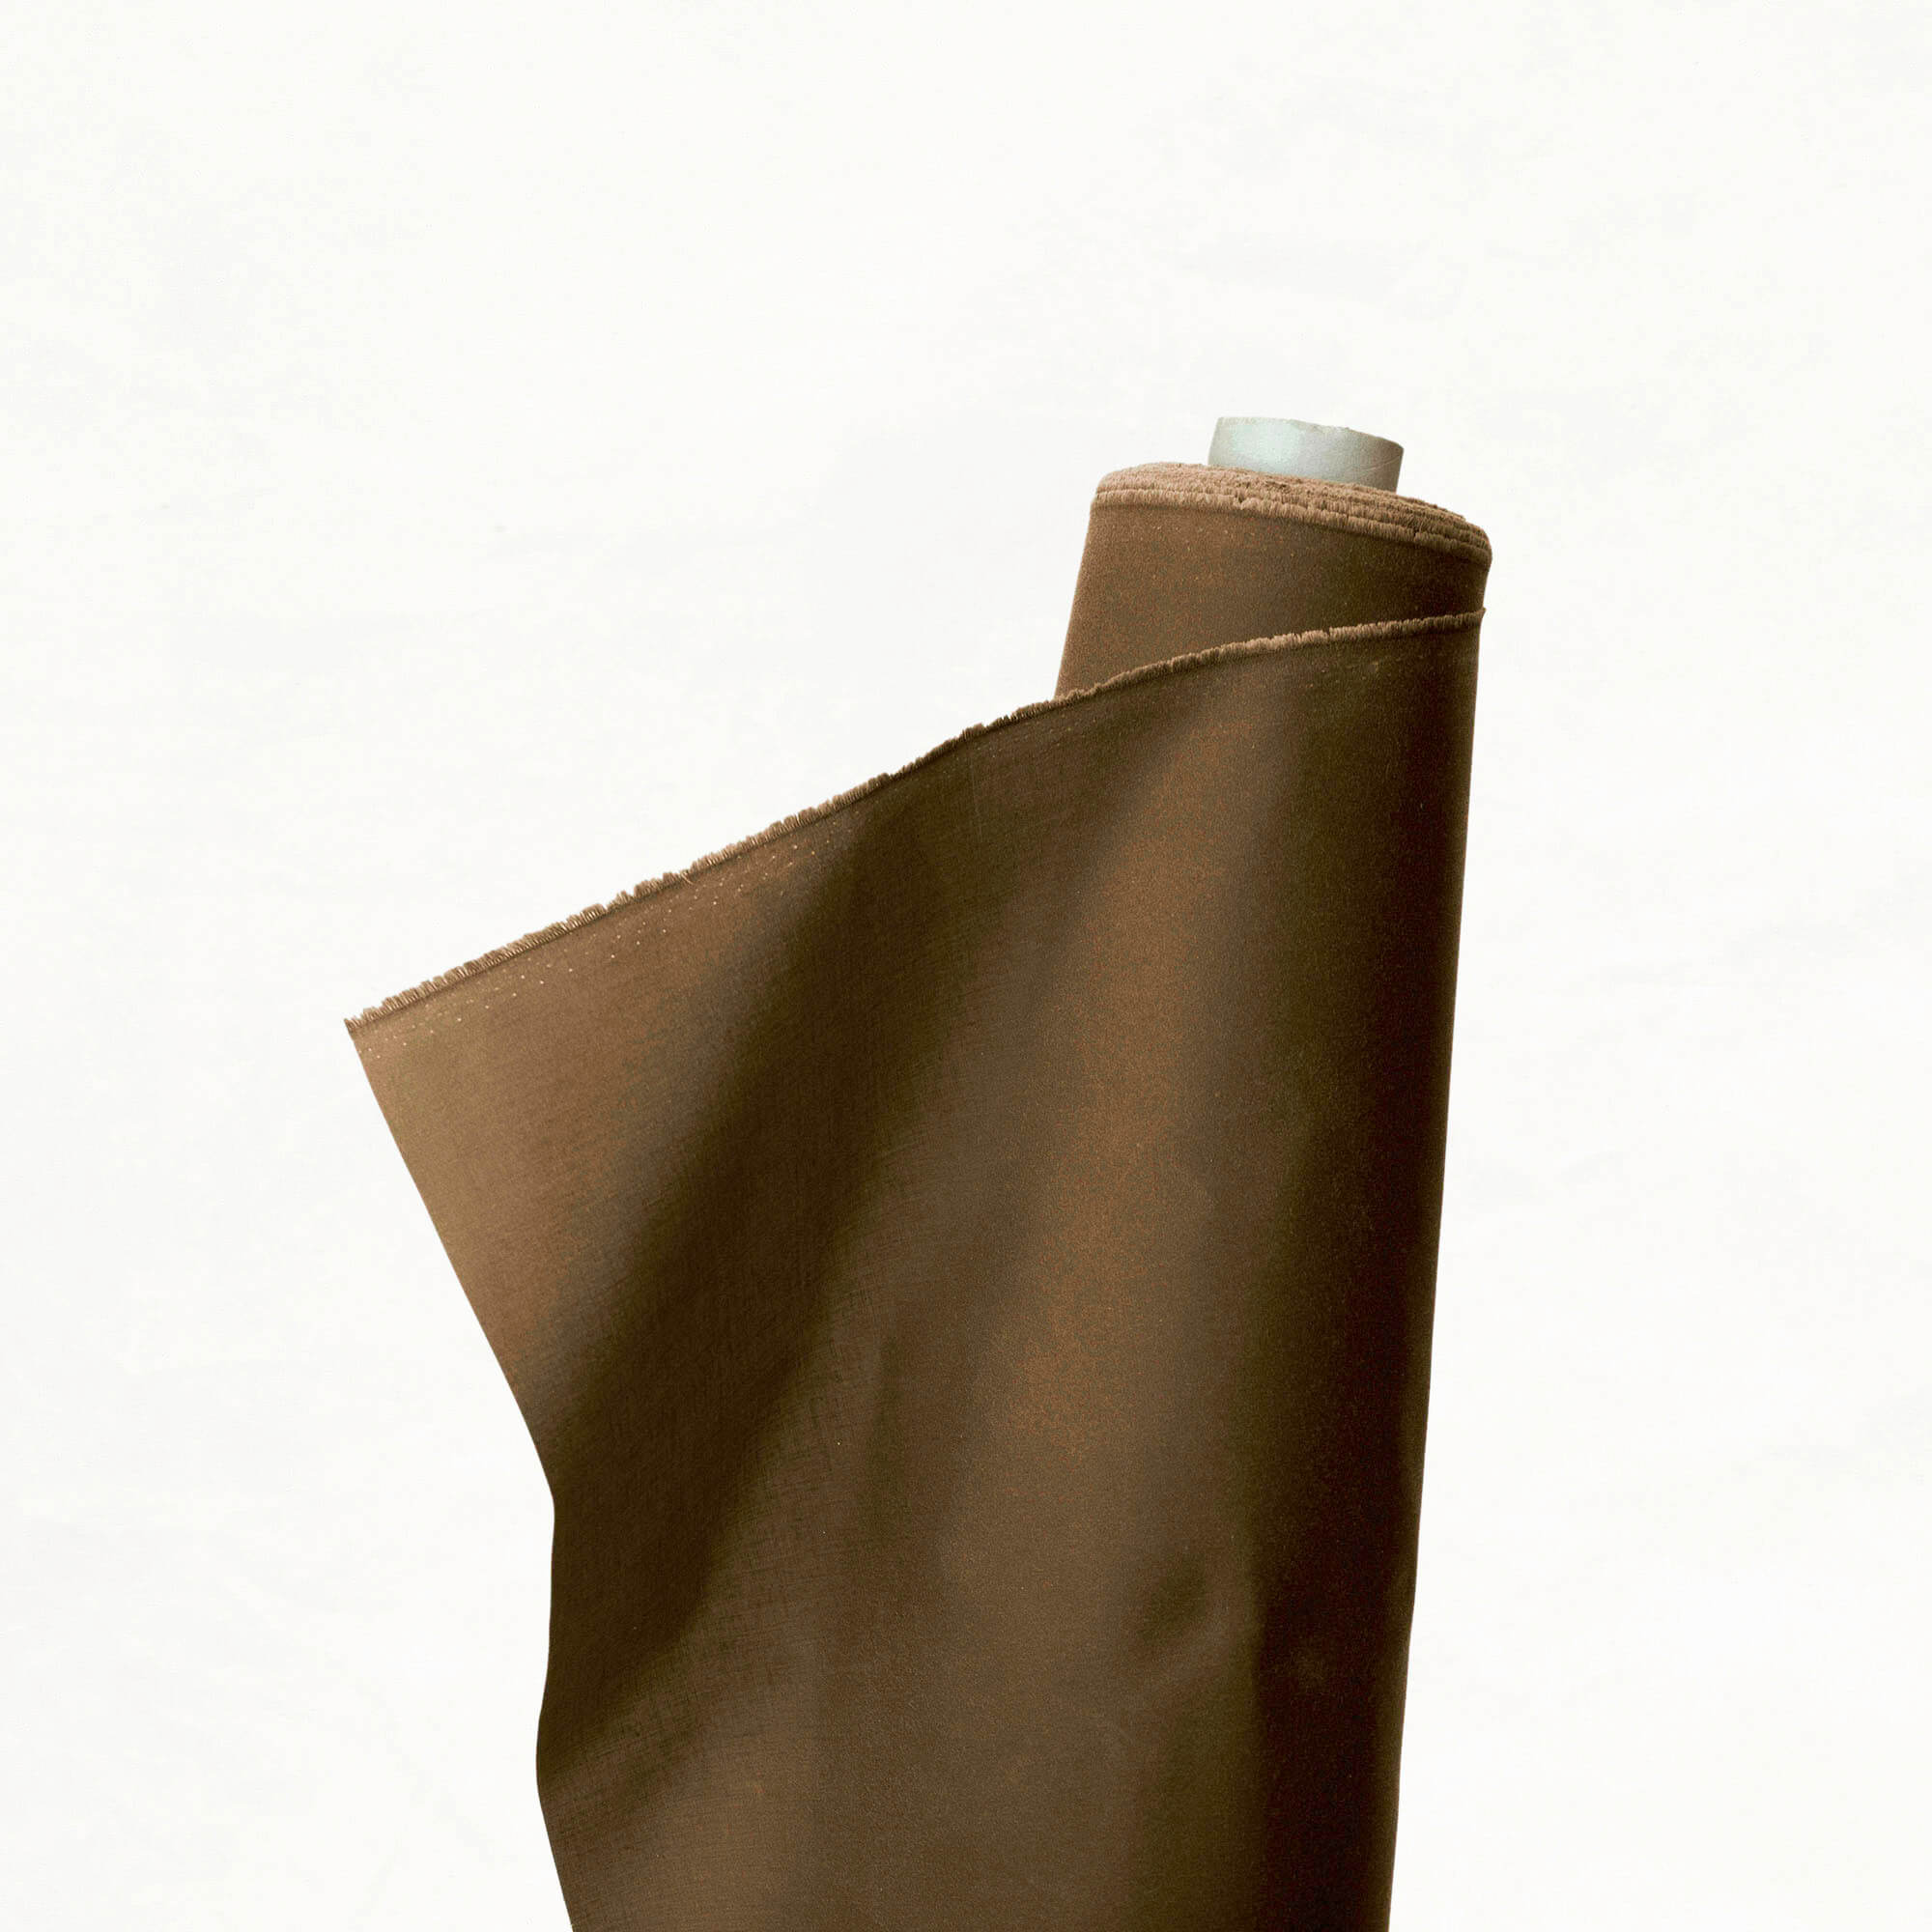 16 Ounce Waxed Canvas Waterproof Tan Fabric By the Yard 100% Cotton Square